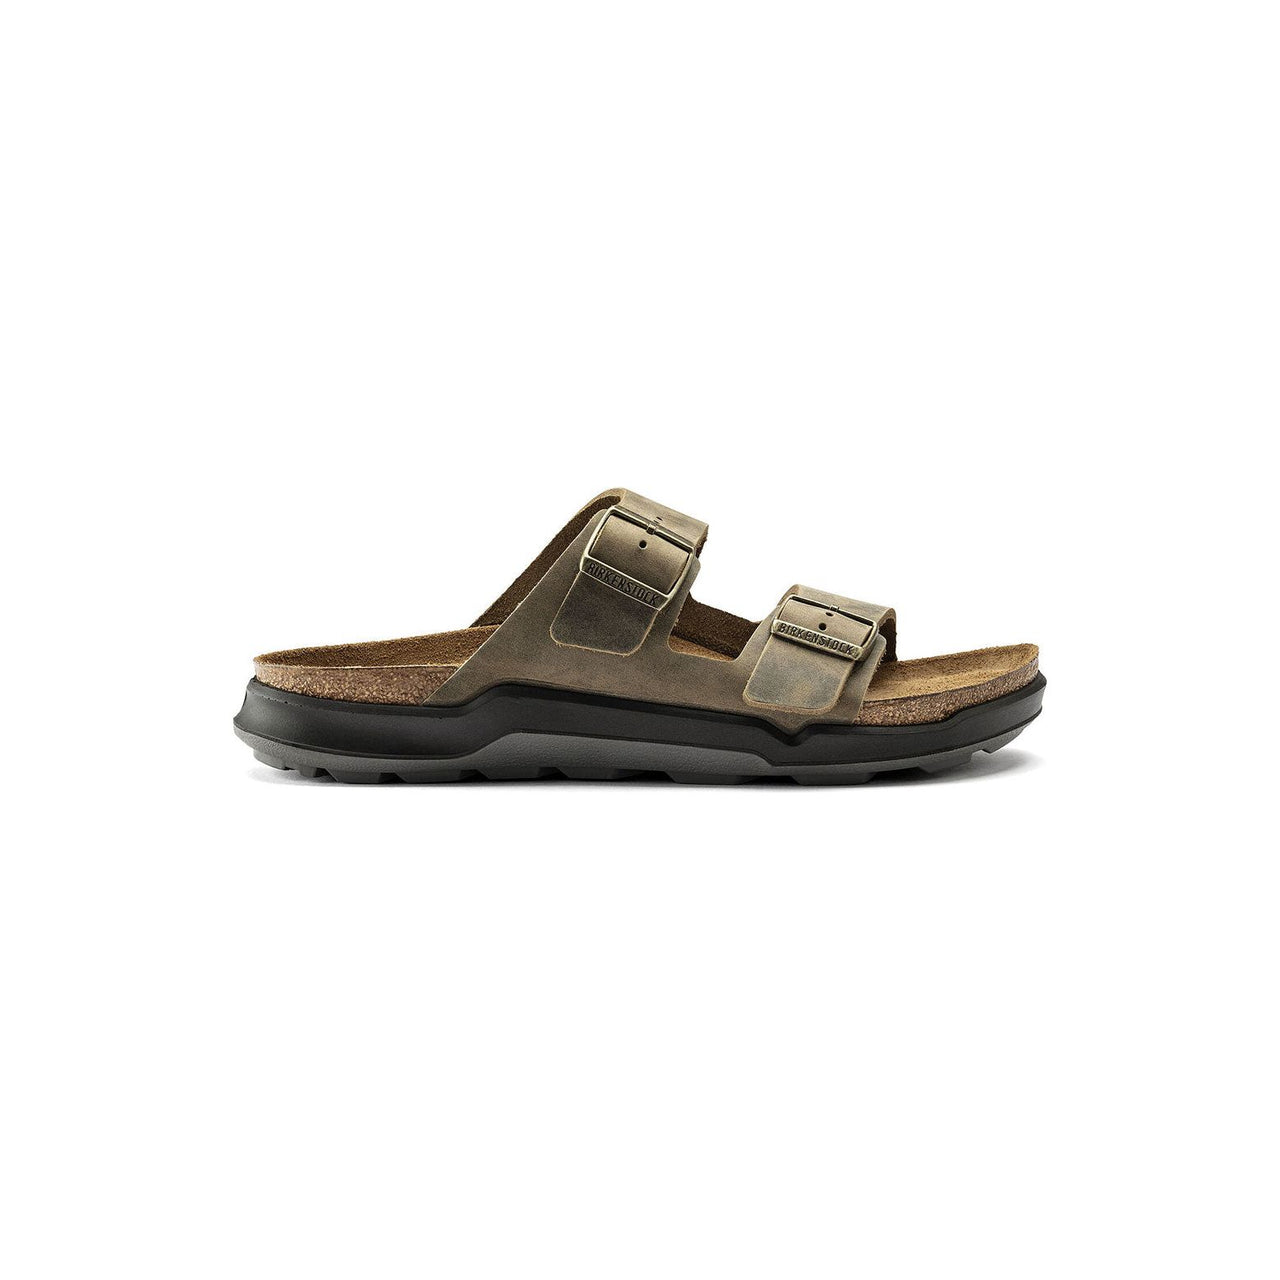 A close-up image of the (1018463) Arizona Ct Sandals in Faded Khaki, showcasing the comfortable, stylish design with adjustable buckle straps and a durable, contoured footbed